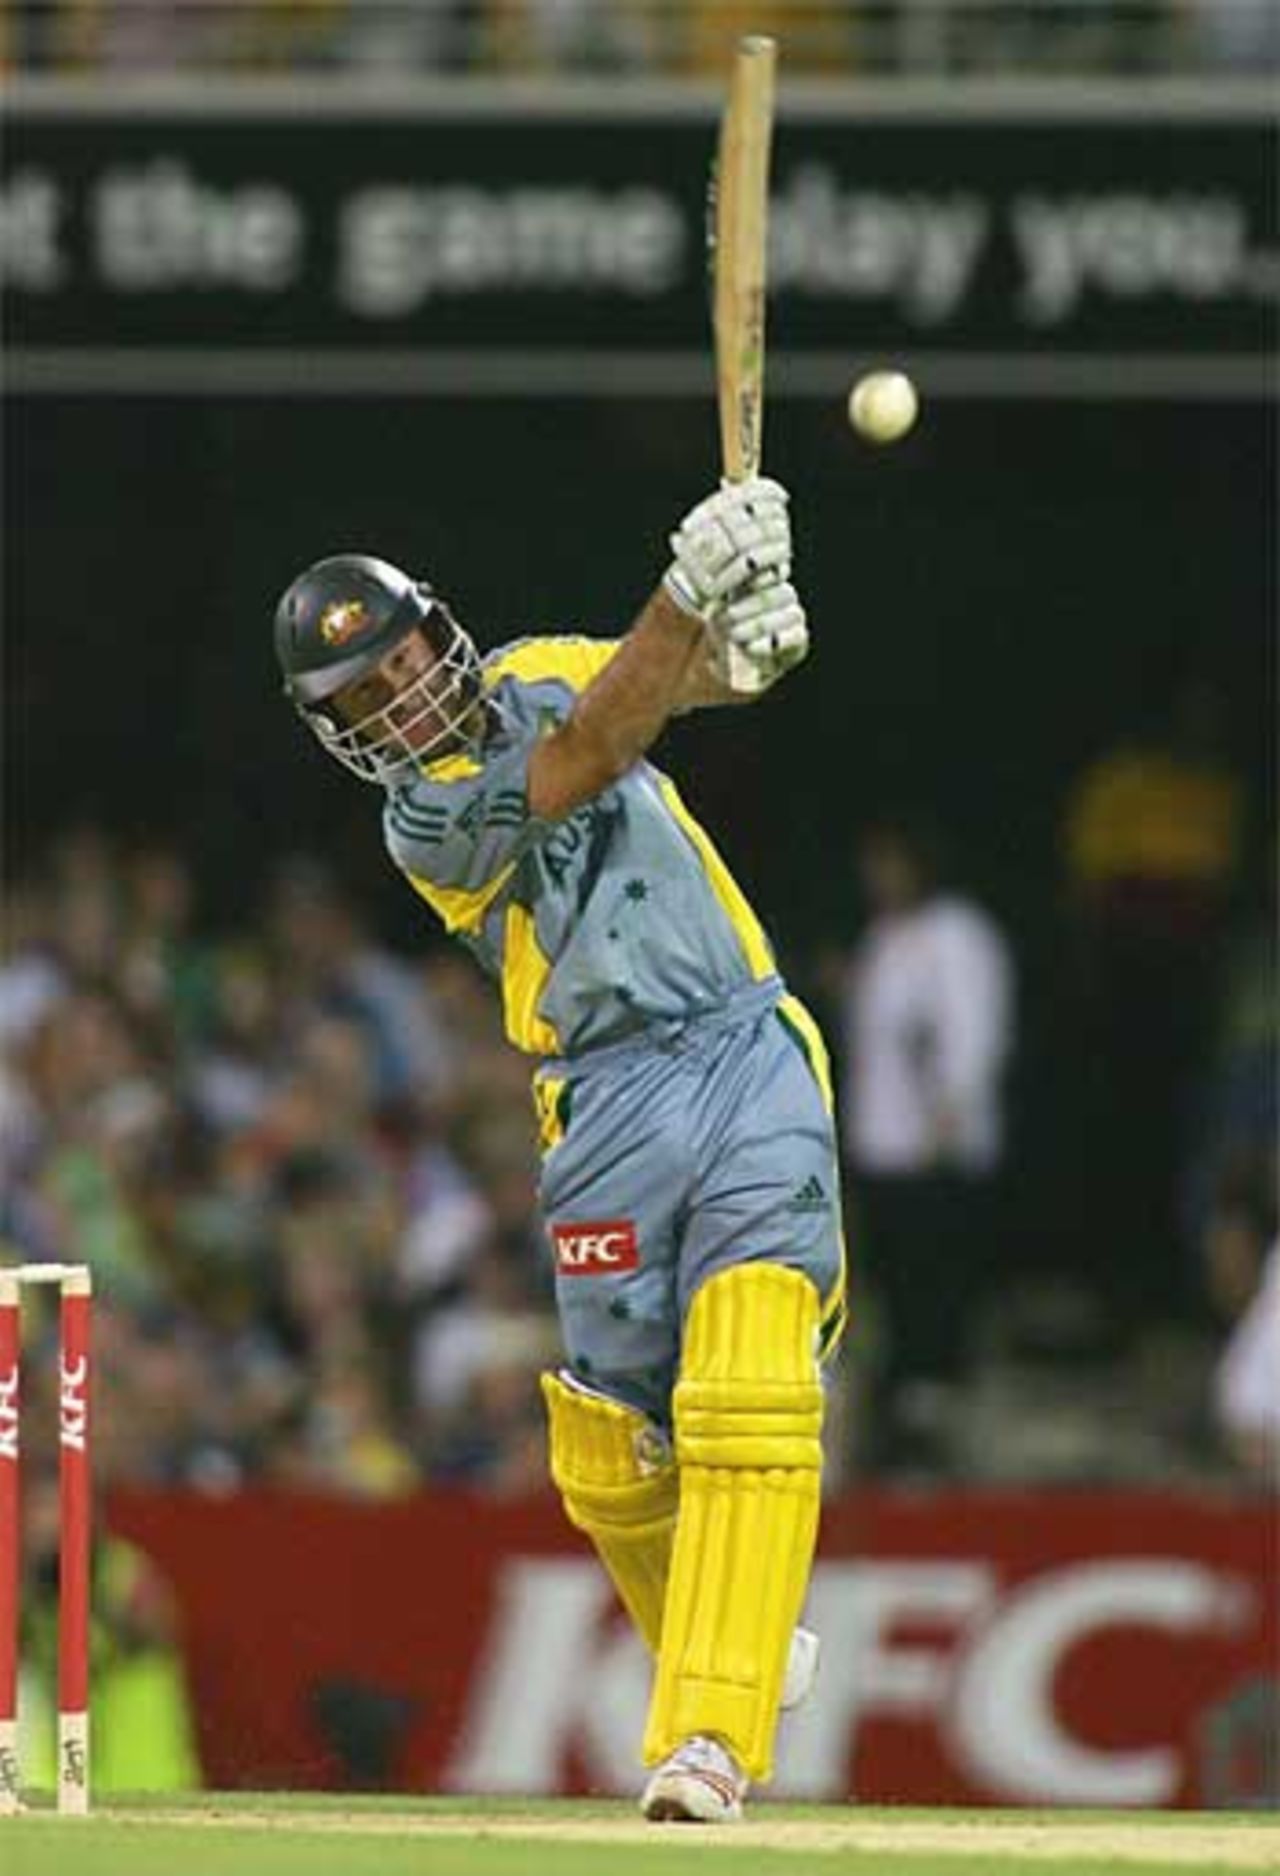 Ricky Ponting goes on the attack at the Gabba, Australia v South Africa, Brisbane, January 9, 2006